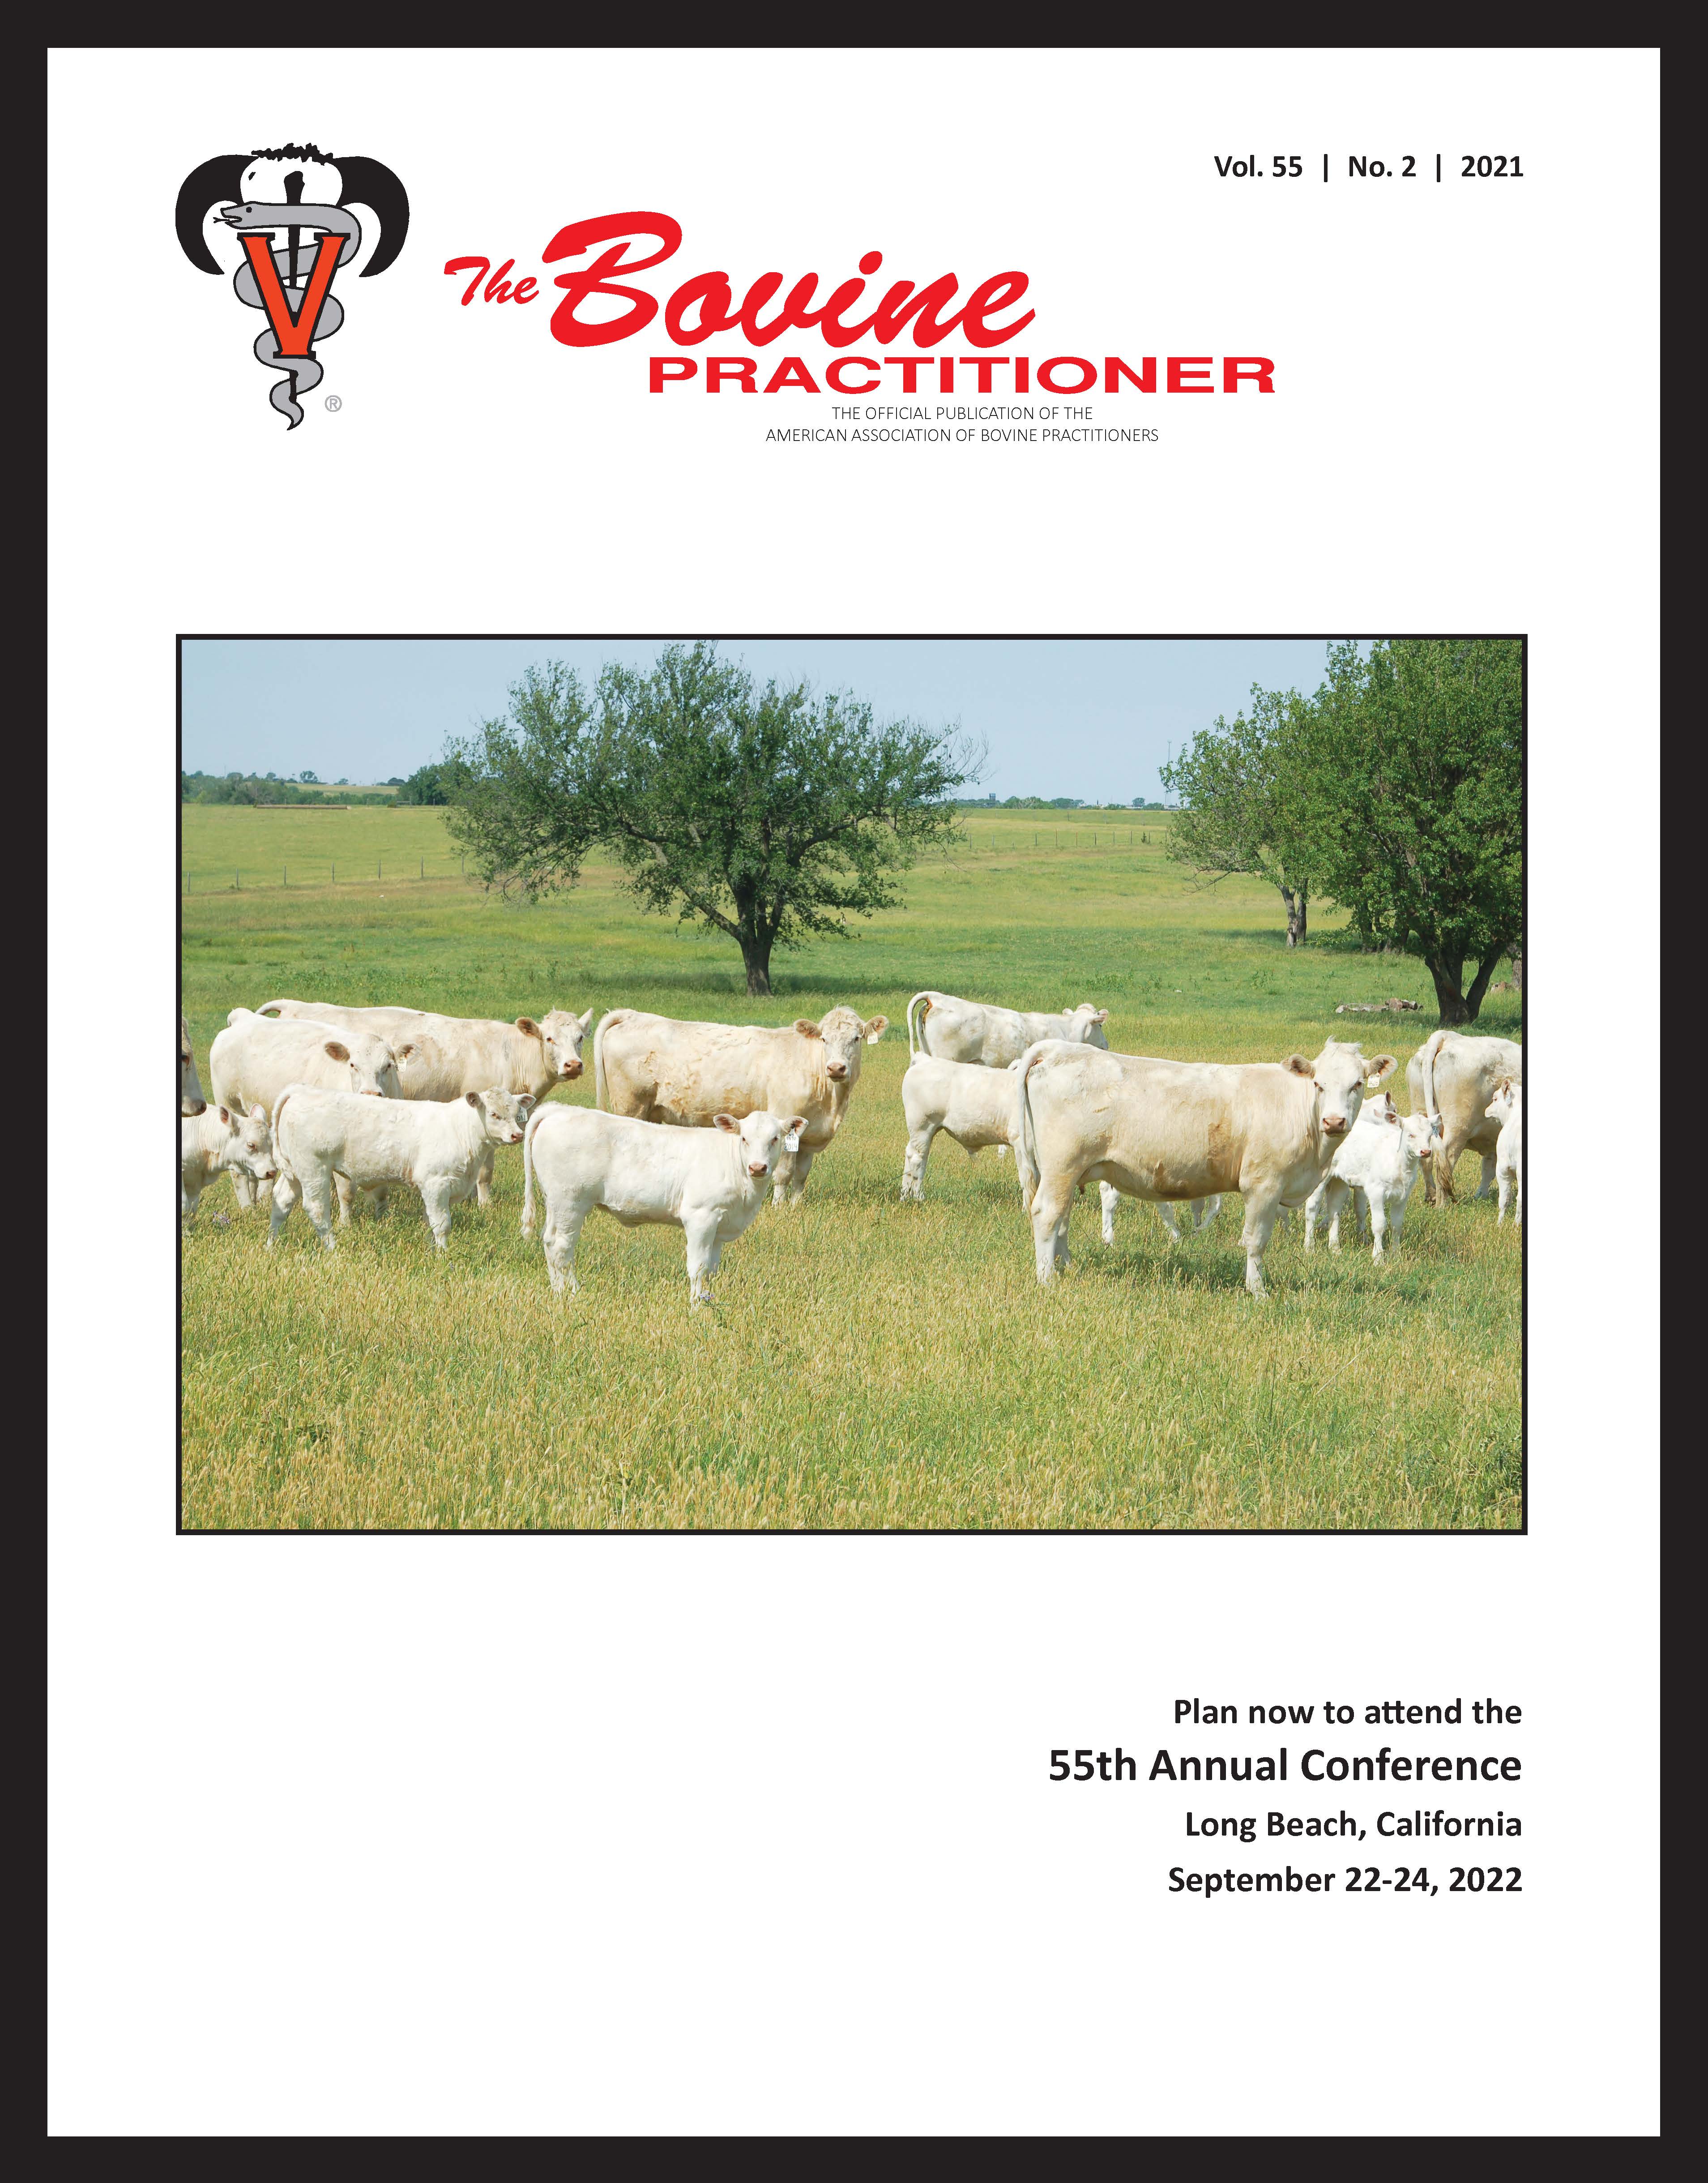 Cover image of 55th Volume, No. 2 of the Bovine Practitioner: courtesy of Chisolm Kinder, editor of Oklahoma Cowman Magazine, the official publication of the Oklahoma Cattlemen's Association.